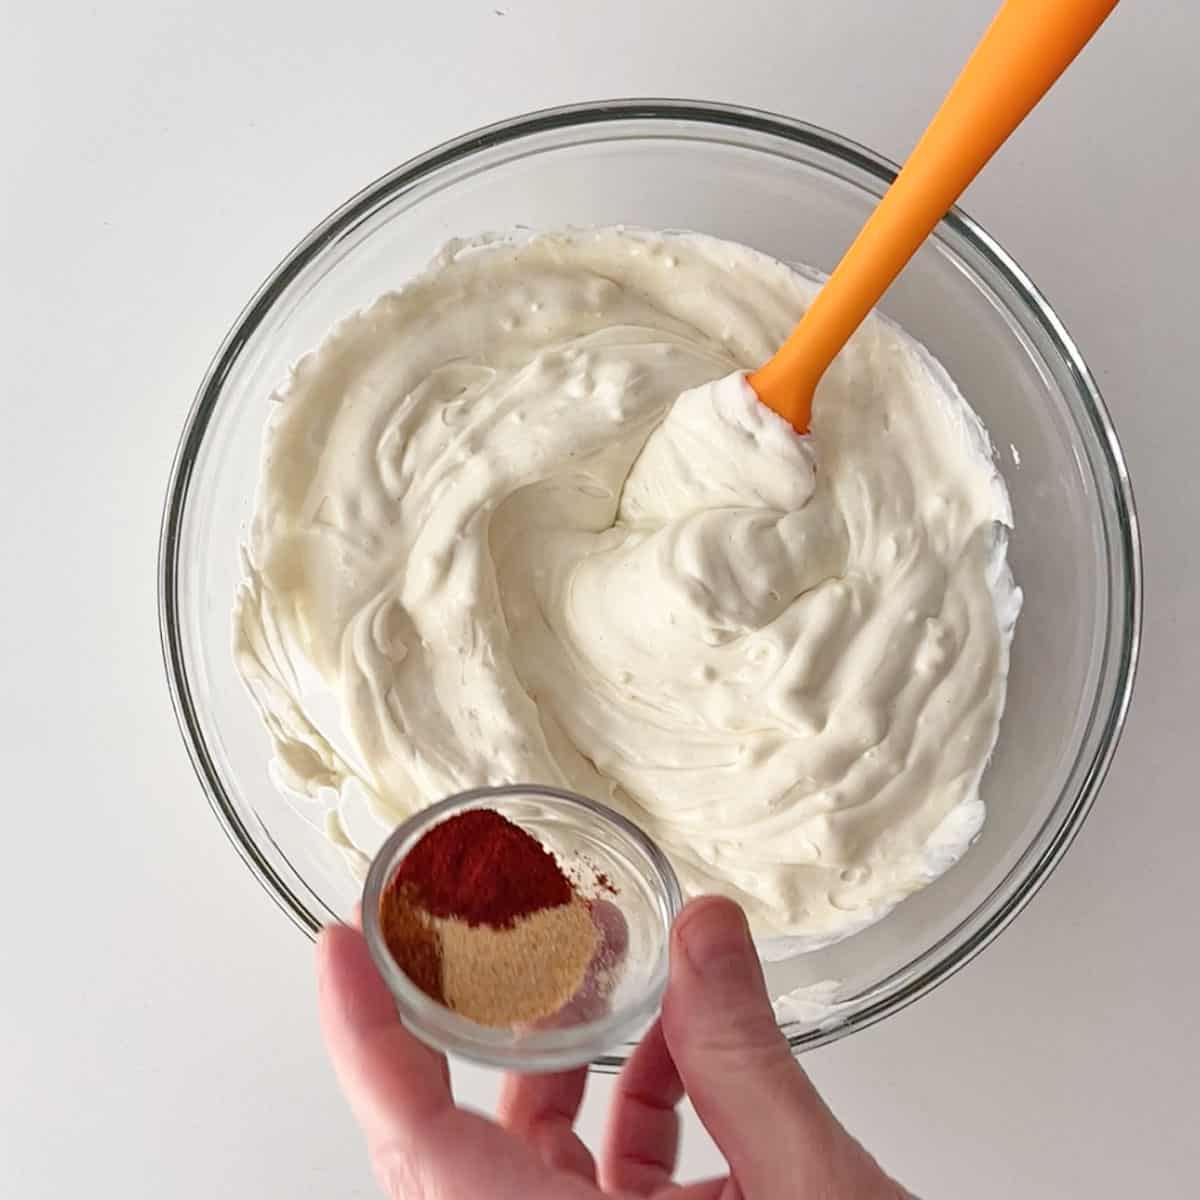 Adding spices to cream cheese dip.